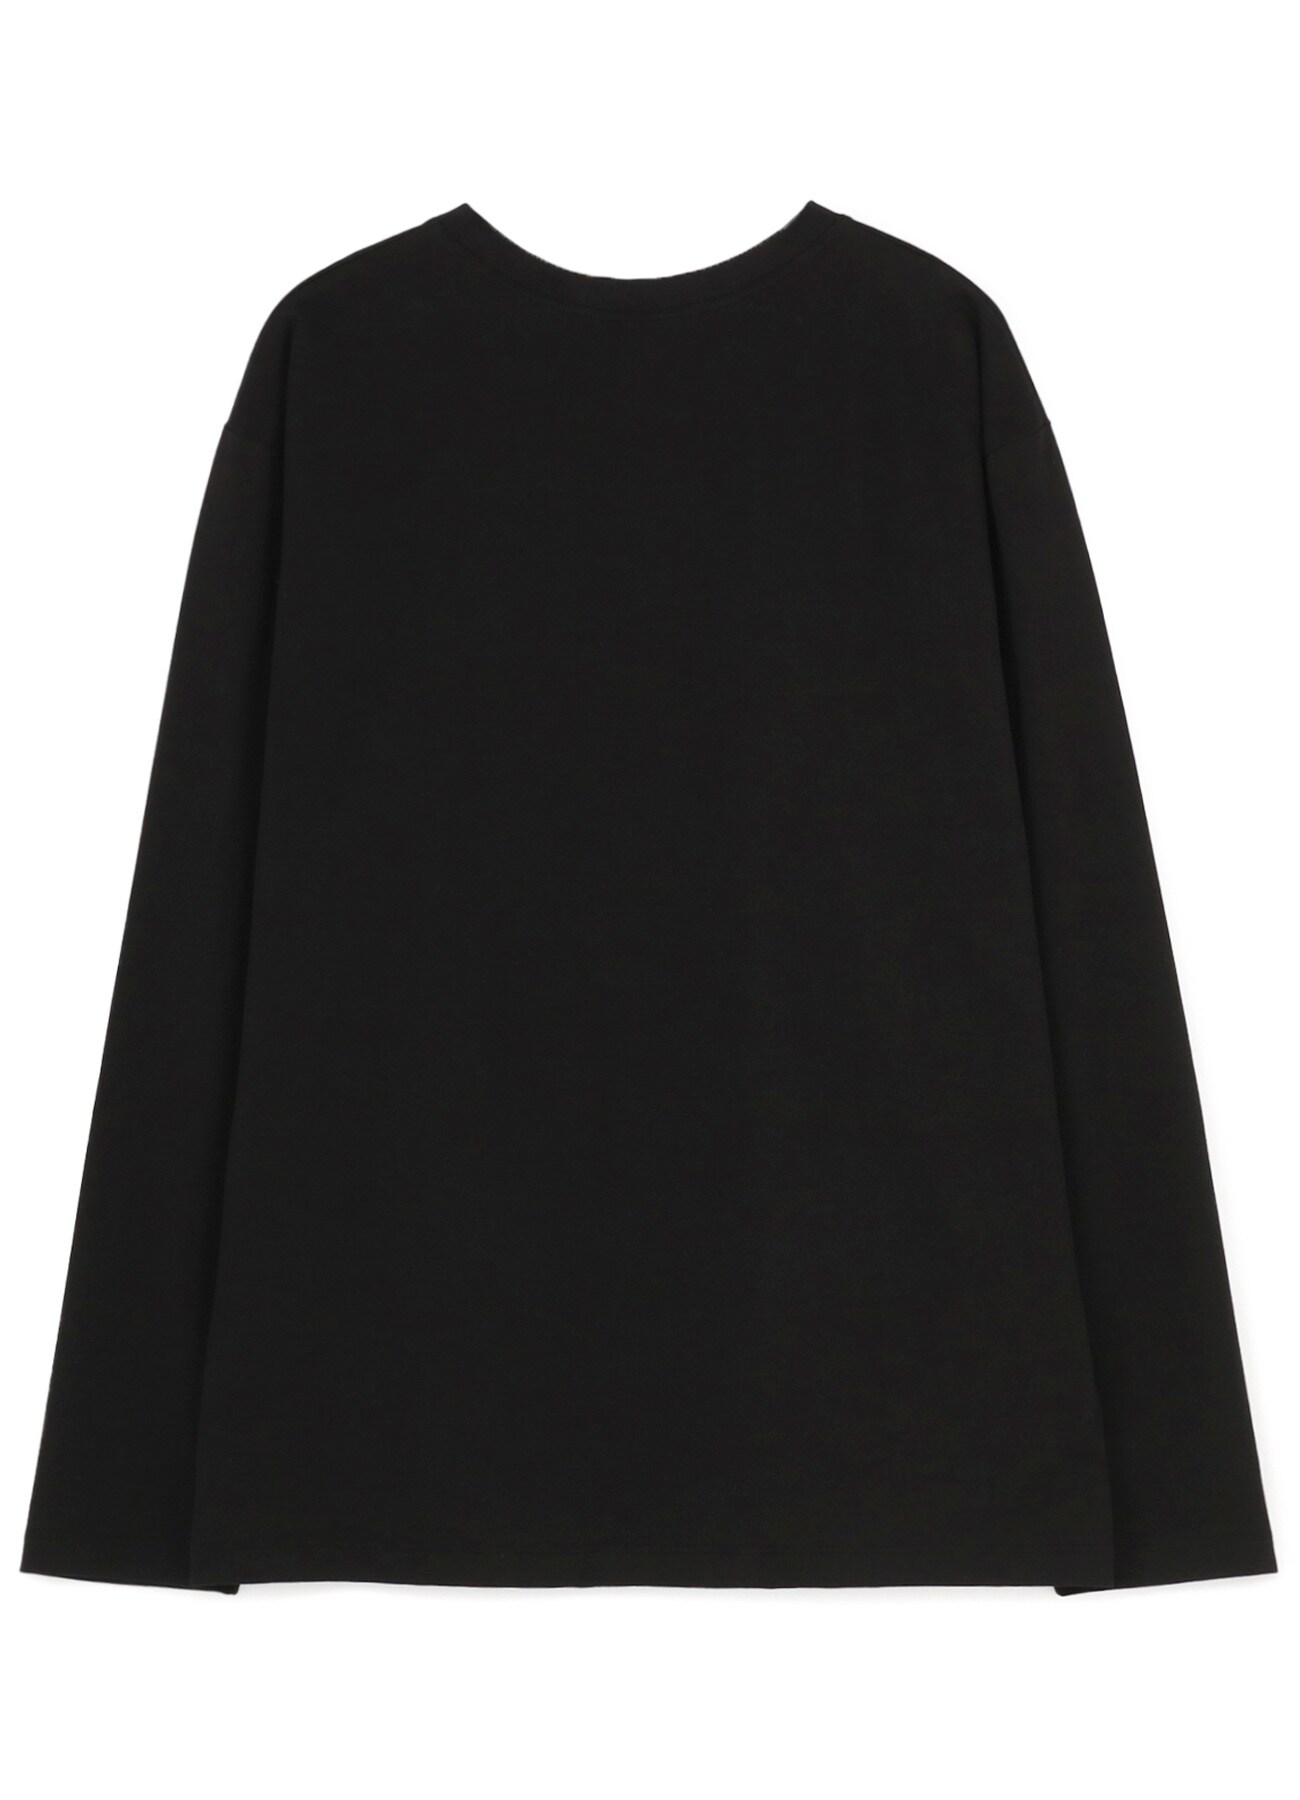 LIMI FEU Embroidery Oversize Long T